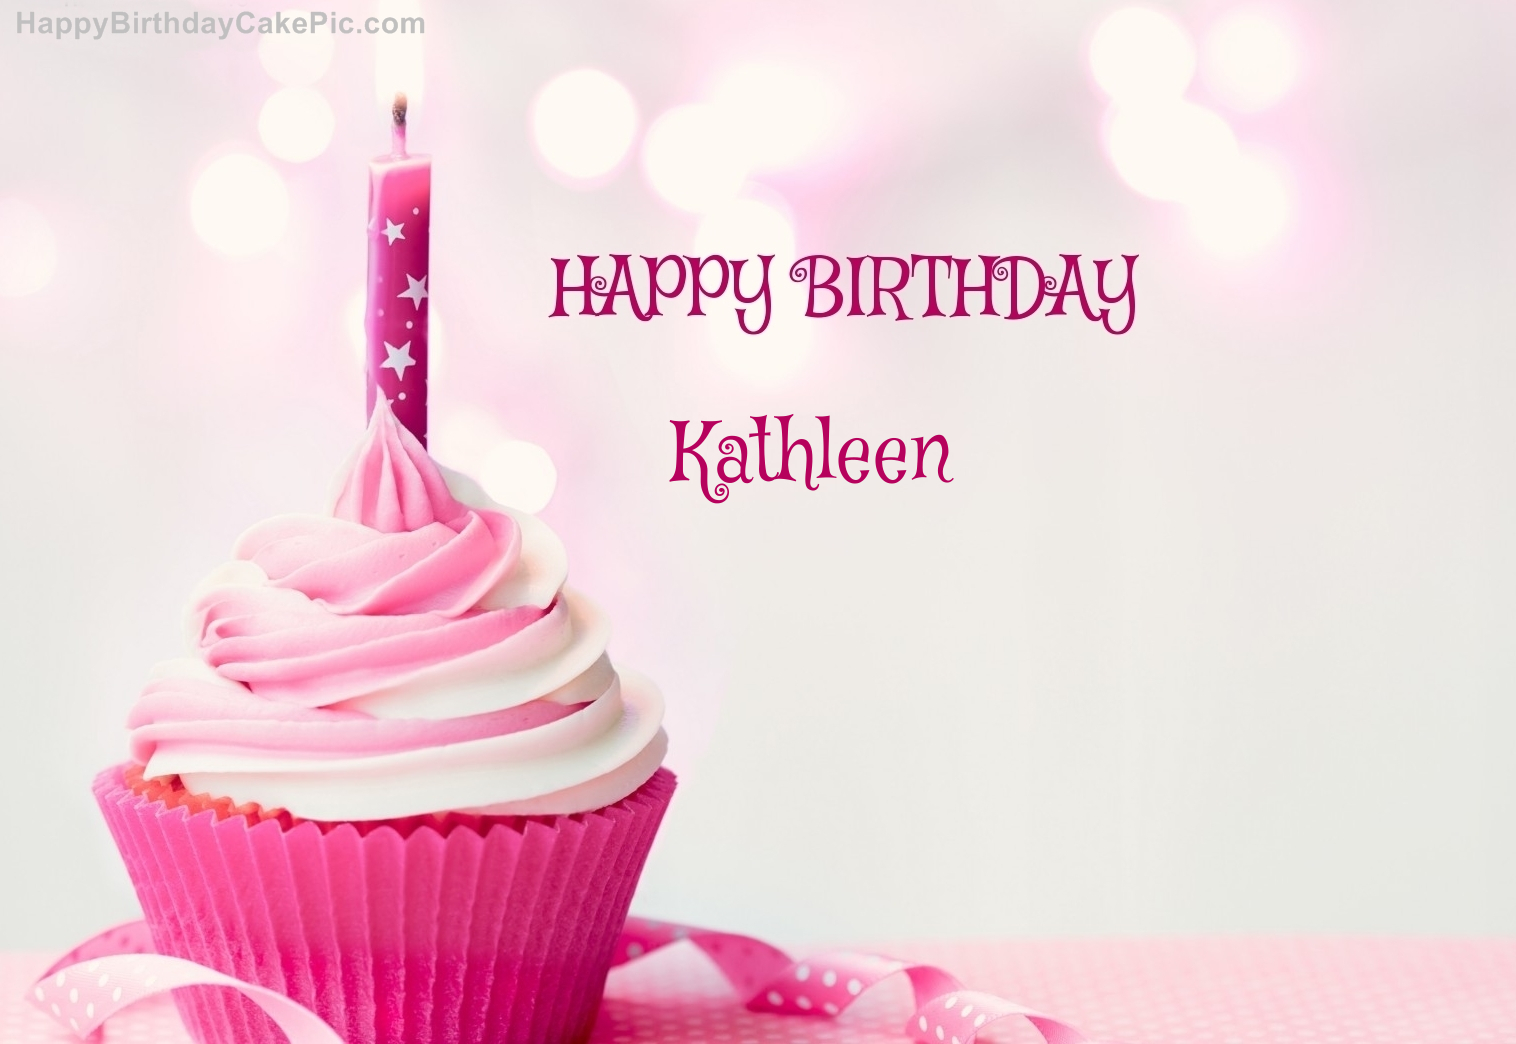 ️ Happy Birthday Cupcake Candle Pink Cake For Kathleen